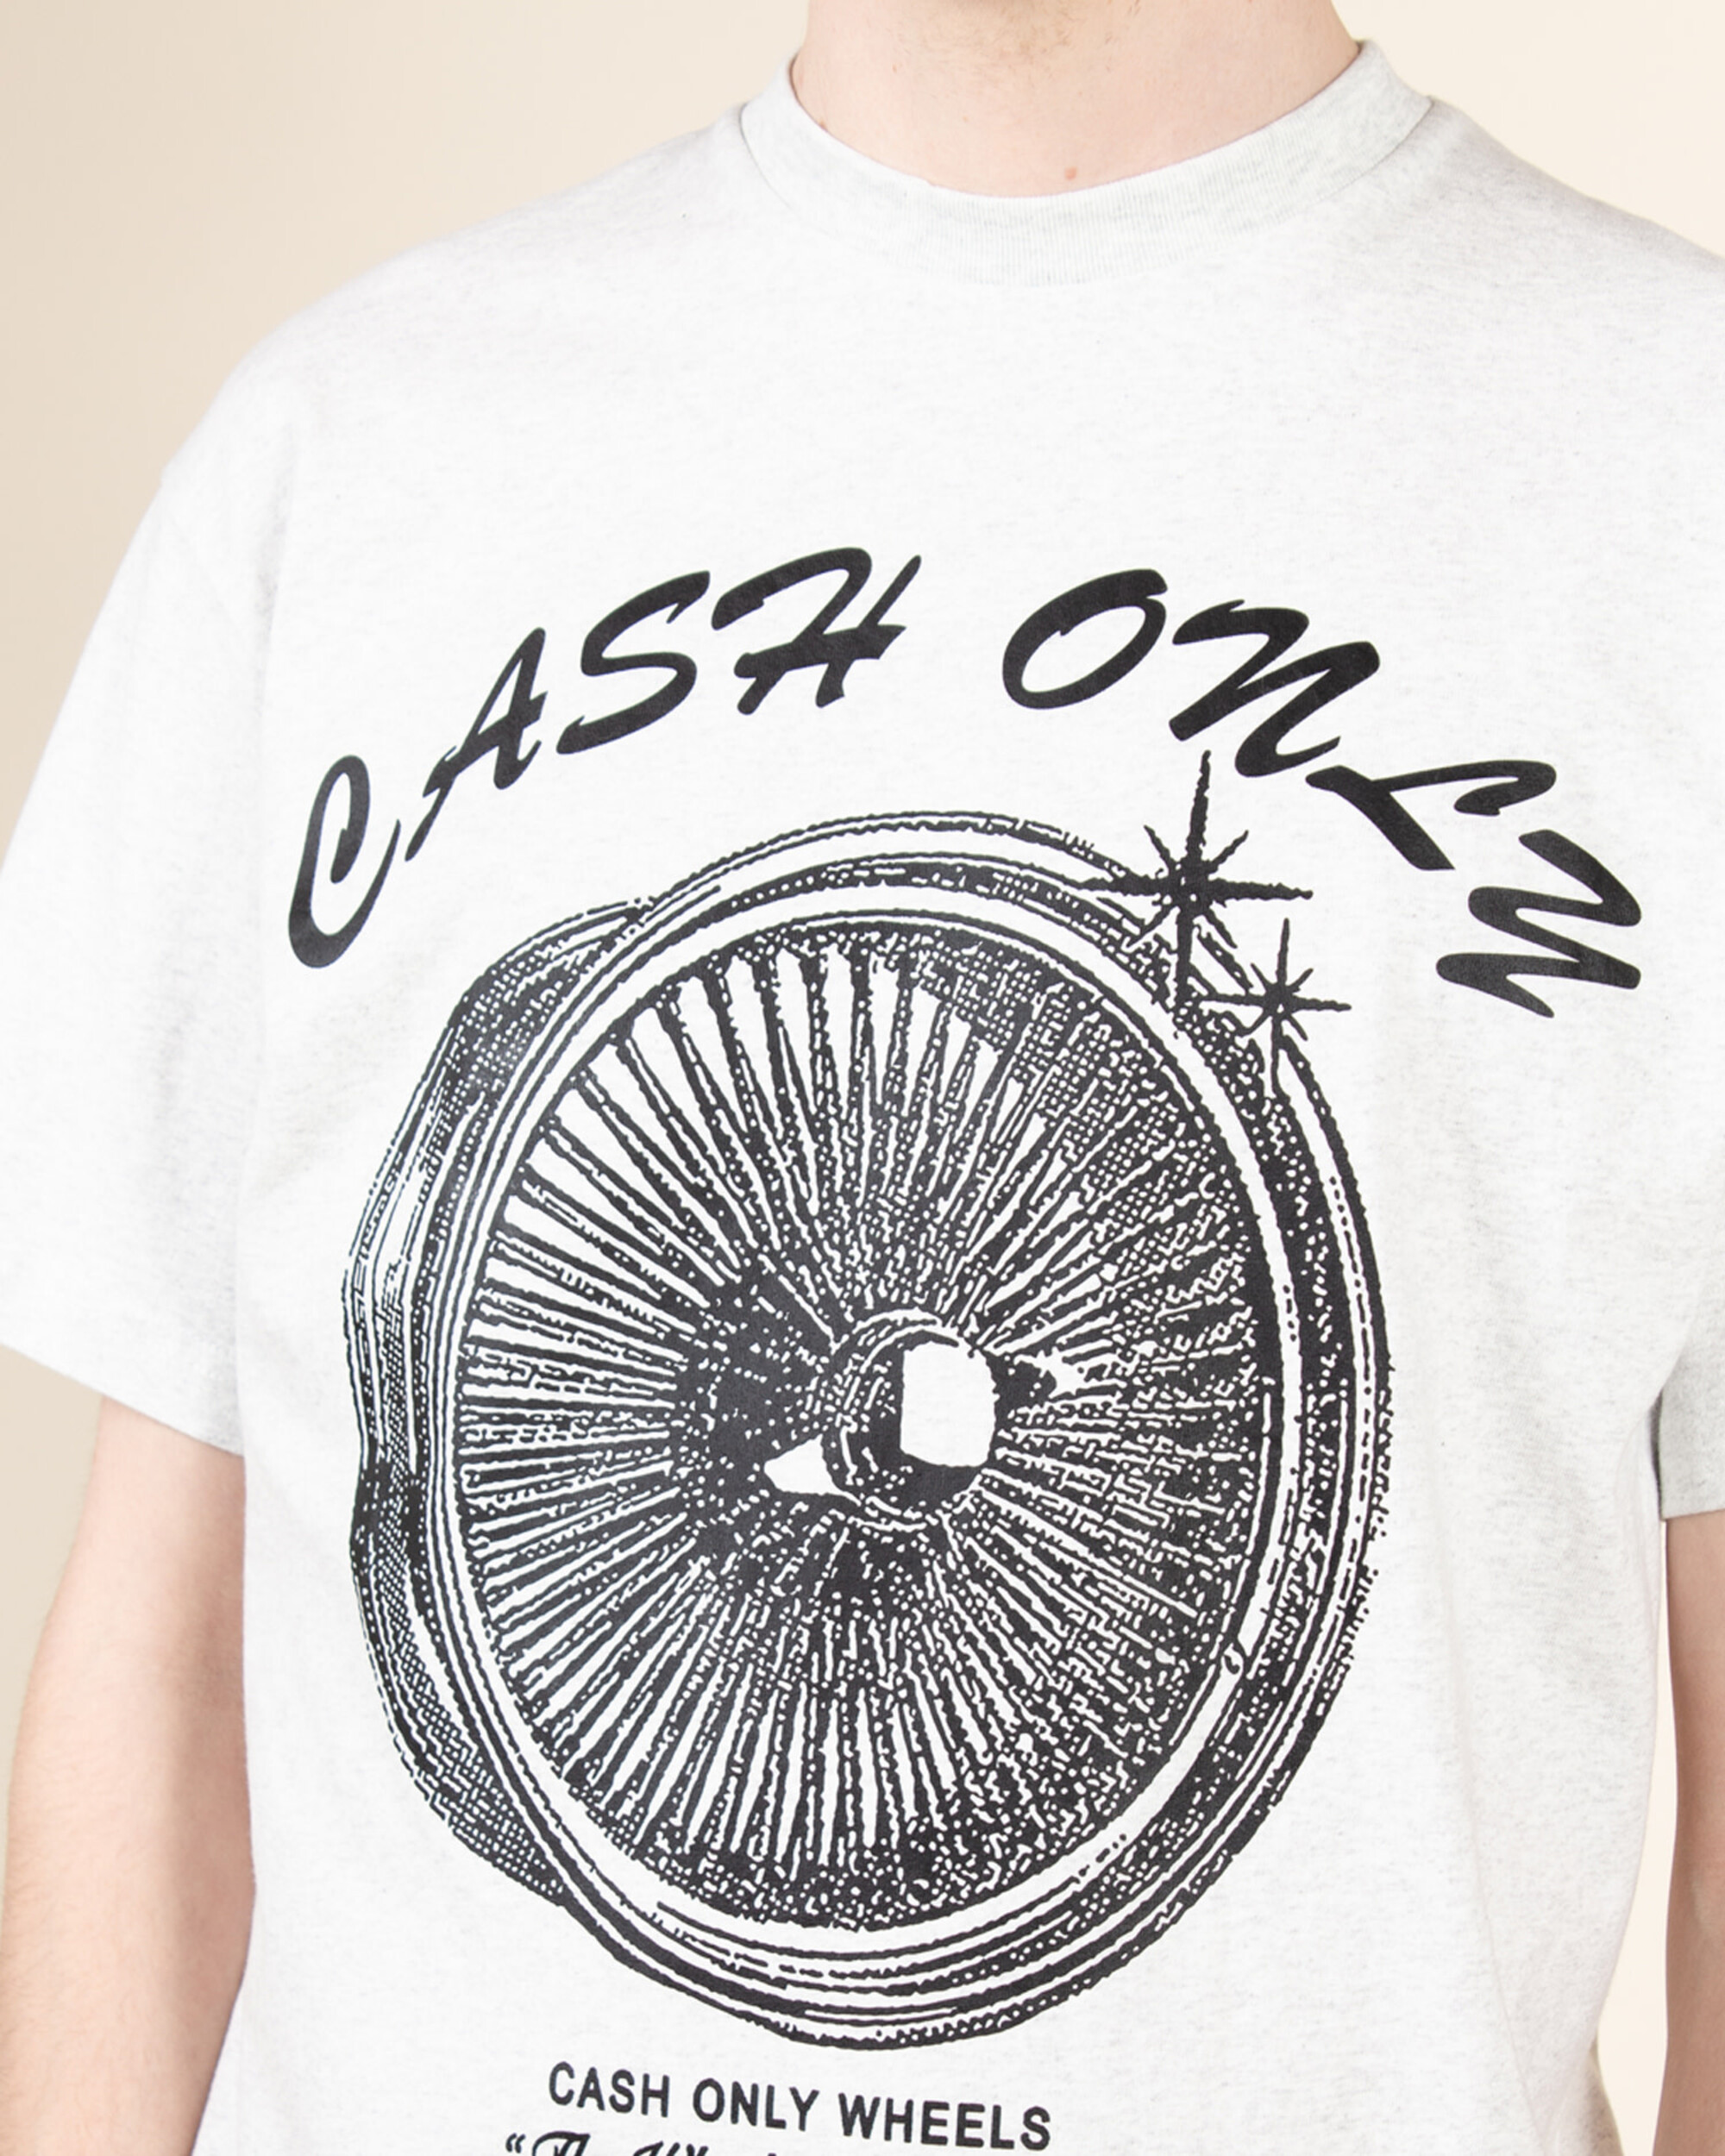 Cash Only Wheels Tee - Ash